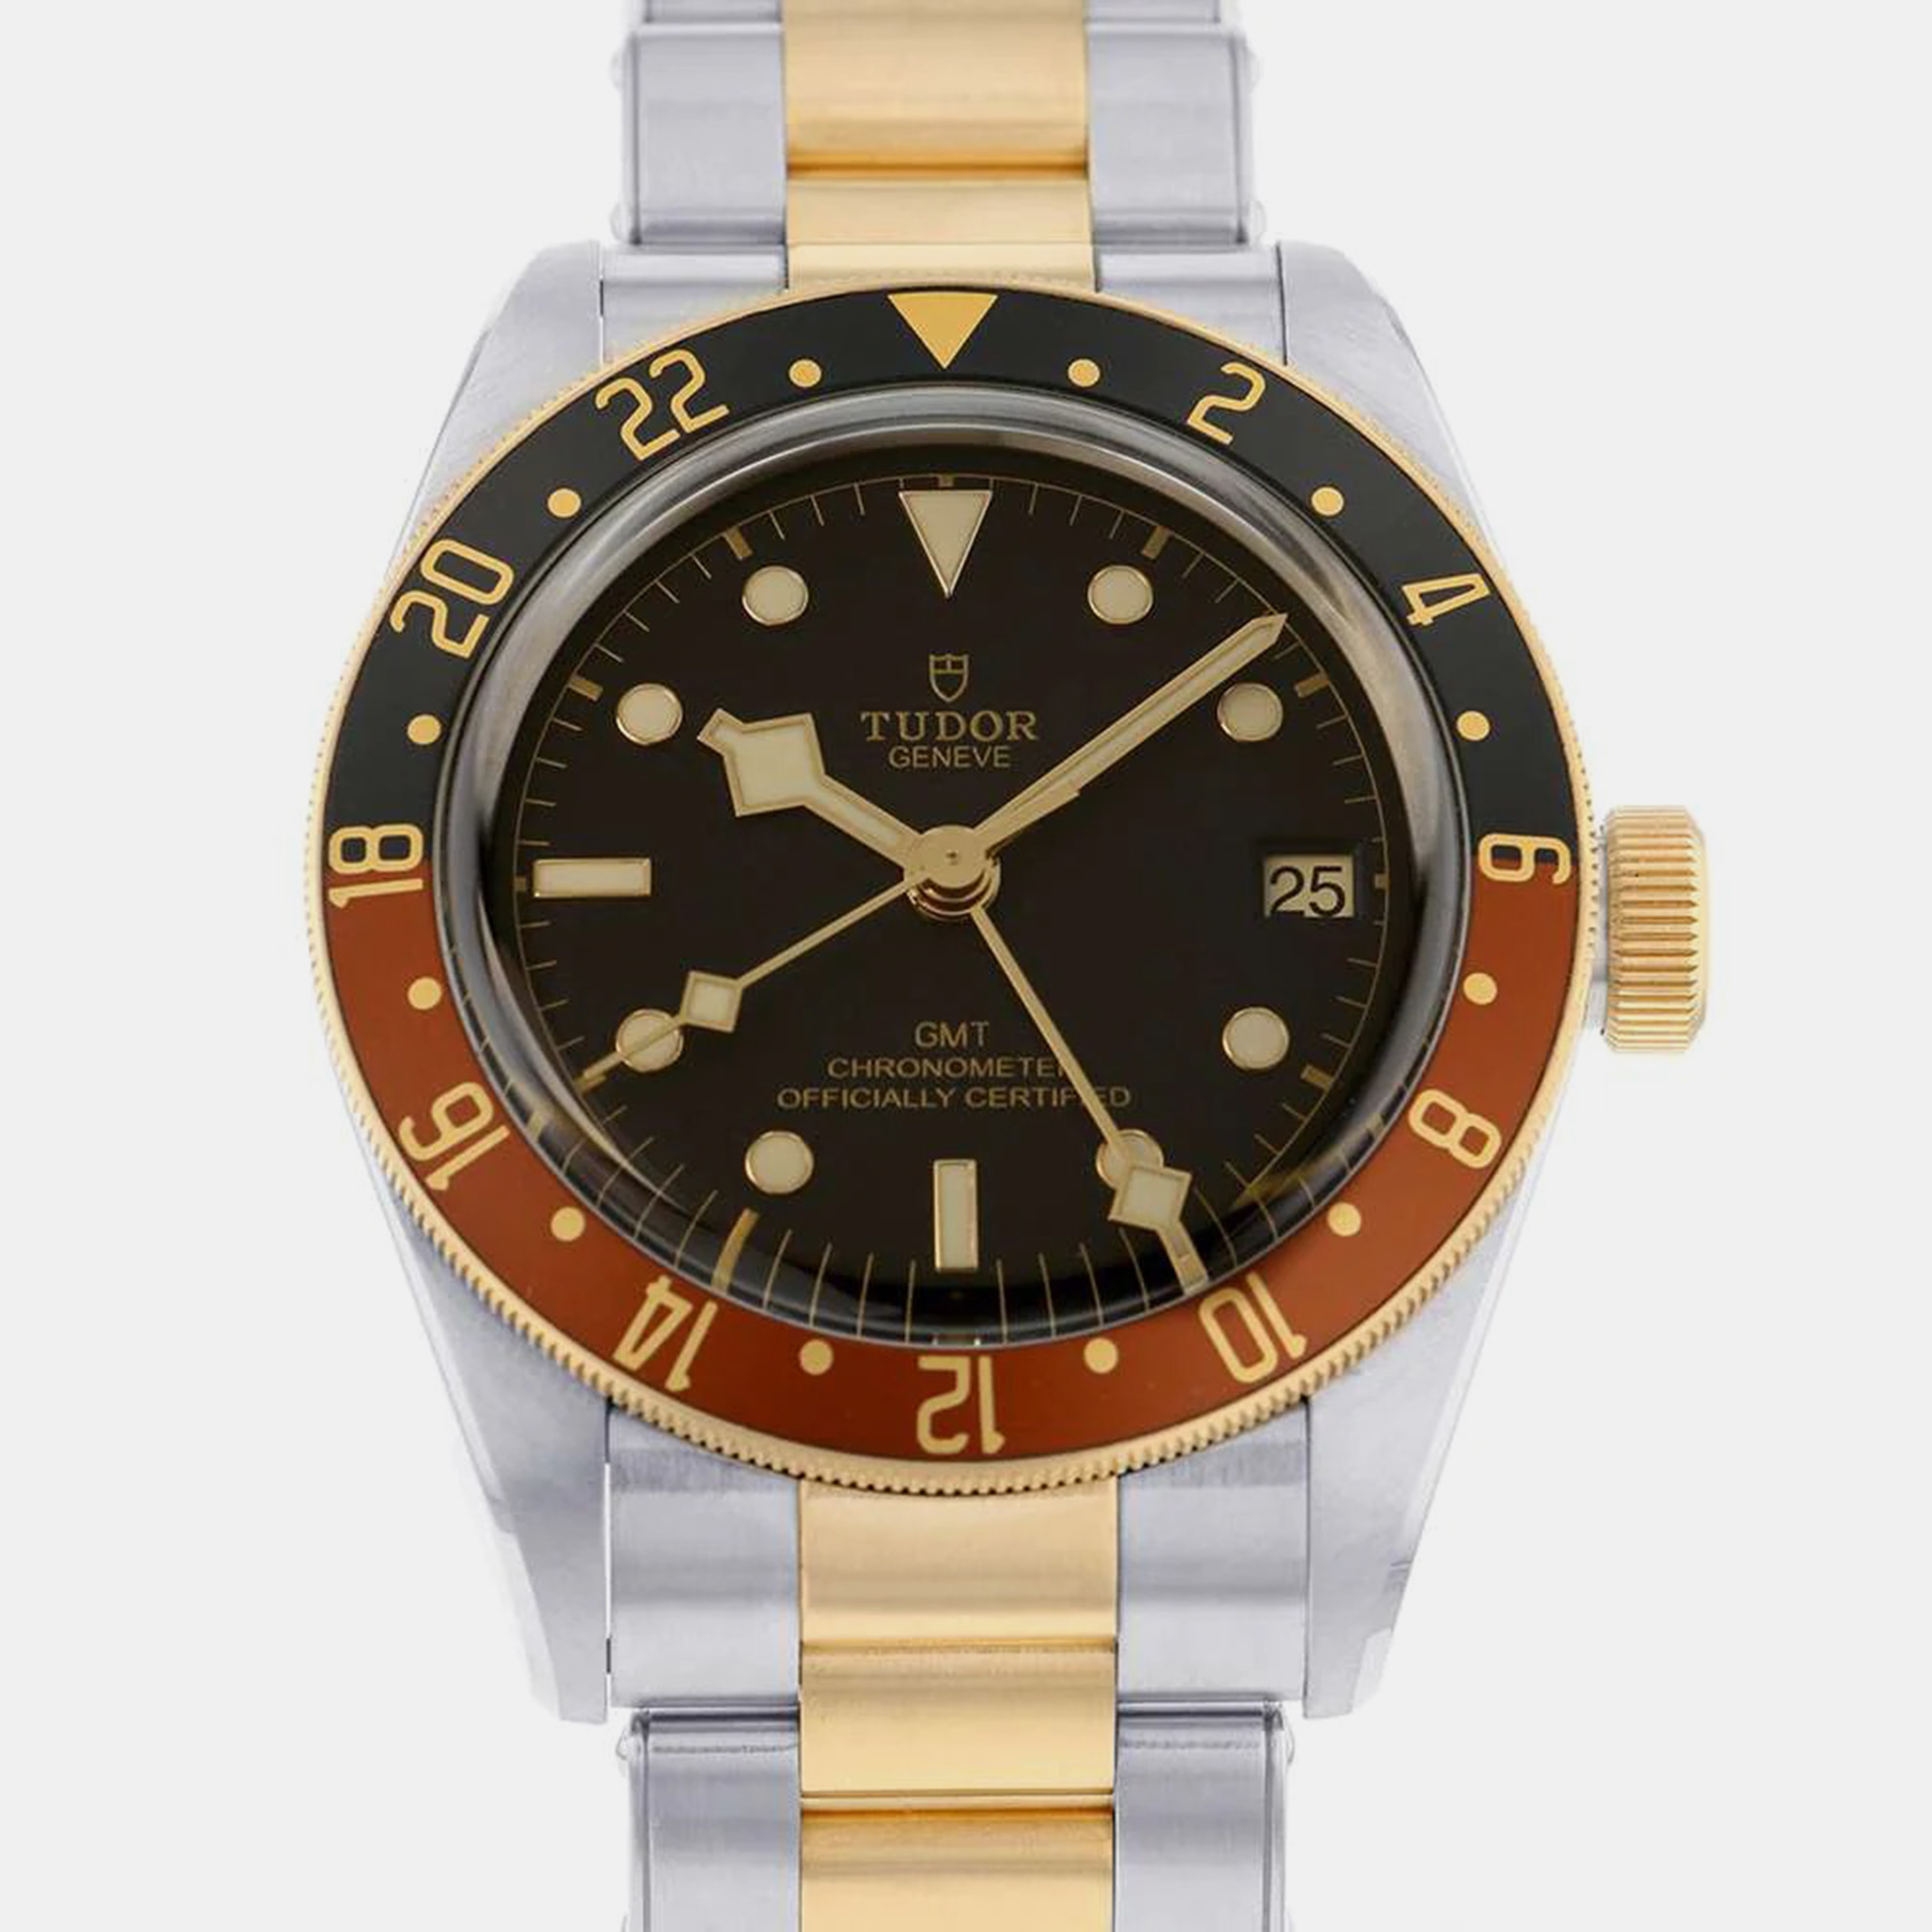 A timeless silhouette made of high quality materials and packed with precision and luxury makes this Tudor wristwatch the perfect choice for a sophisticated finish to any look. It is a grand creation to elevate the everyday experience.